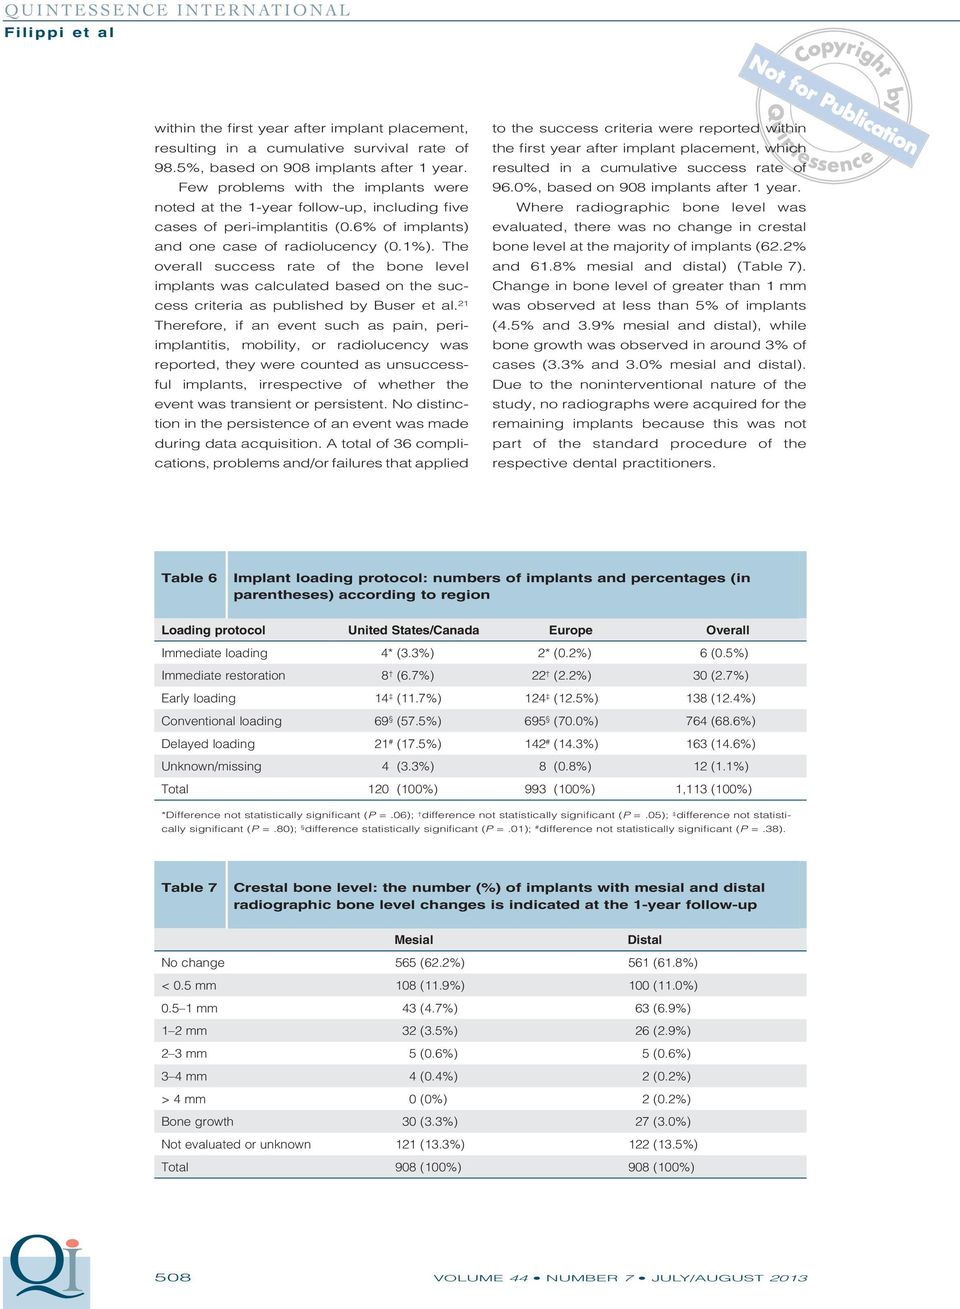 the standard procedure of the Table 6 Implant loading protocol: numbers of implants and percentages (in parentheses) according to region Loading protocol United States/Canada Europe Overall Immediate